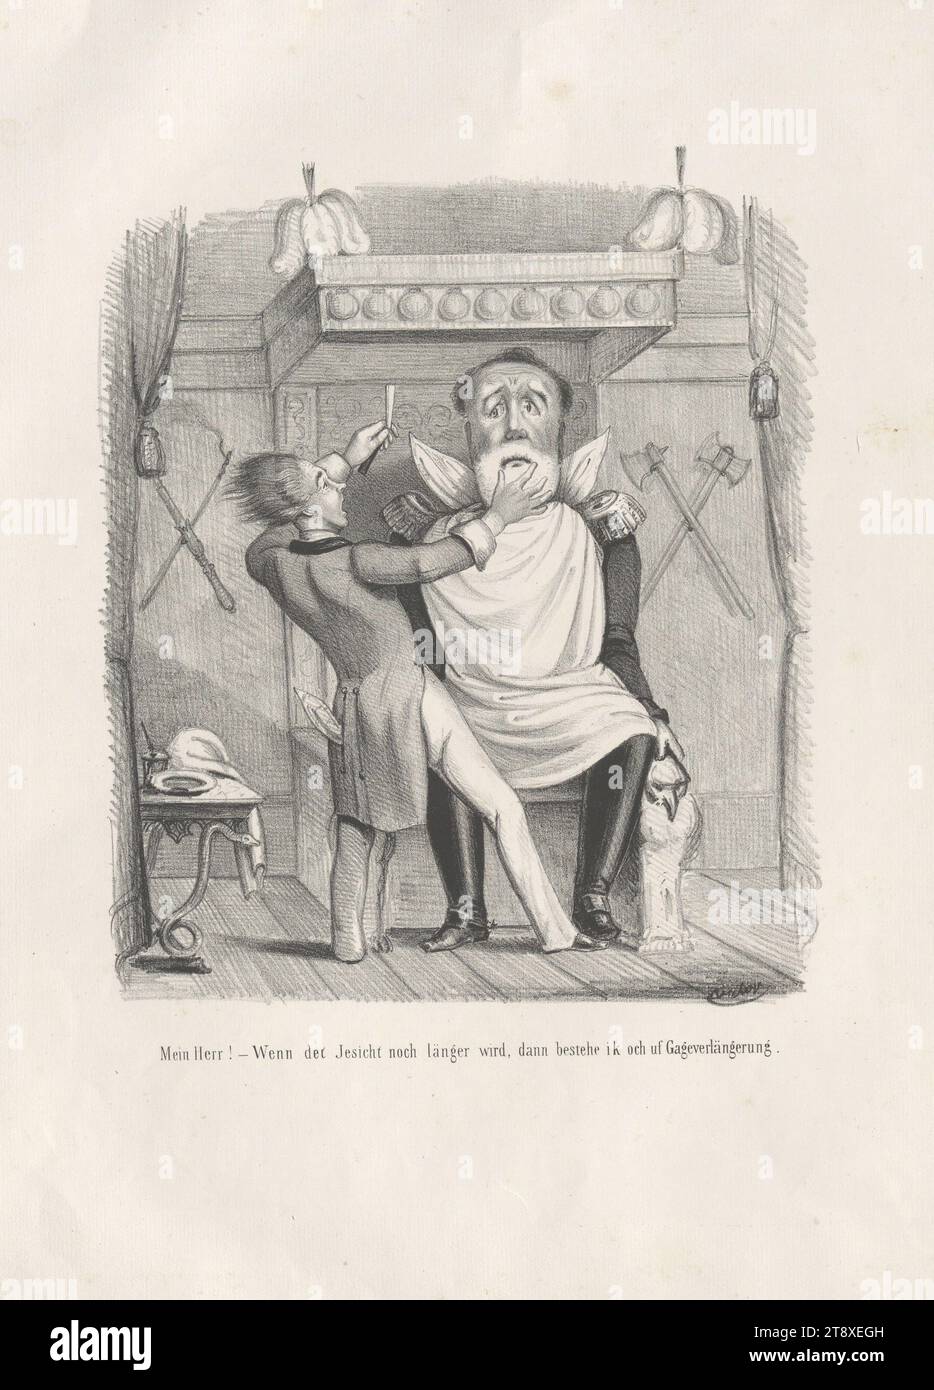 My lord! - If det Jesicht becomes even longer, then ik och uf Gageverlängerung insist.' (Caricature), Unknown, 1848, paper, chalk-manner lithograph, height 36, 2 cm, width 27 cm, Caricature, Satire, Revolutions of 1848, 1849, beard, The Vienna Collection Stock Photo